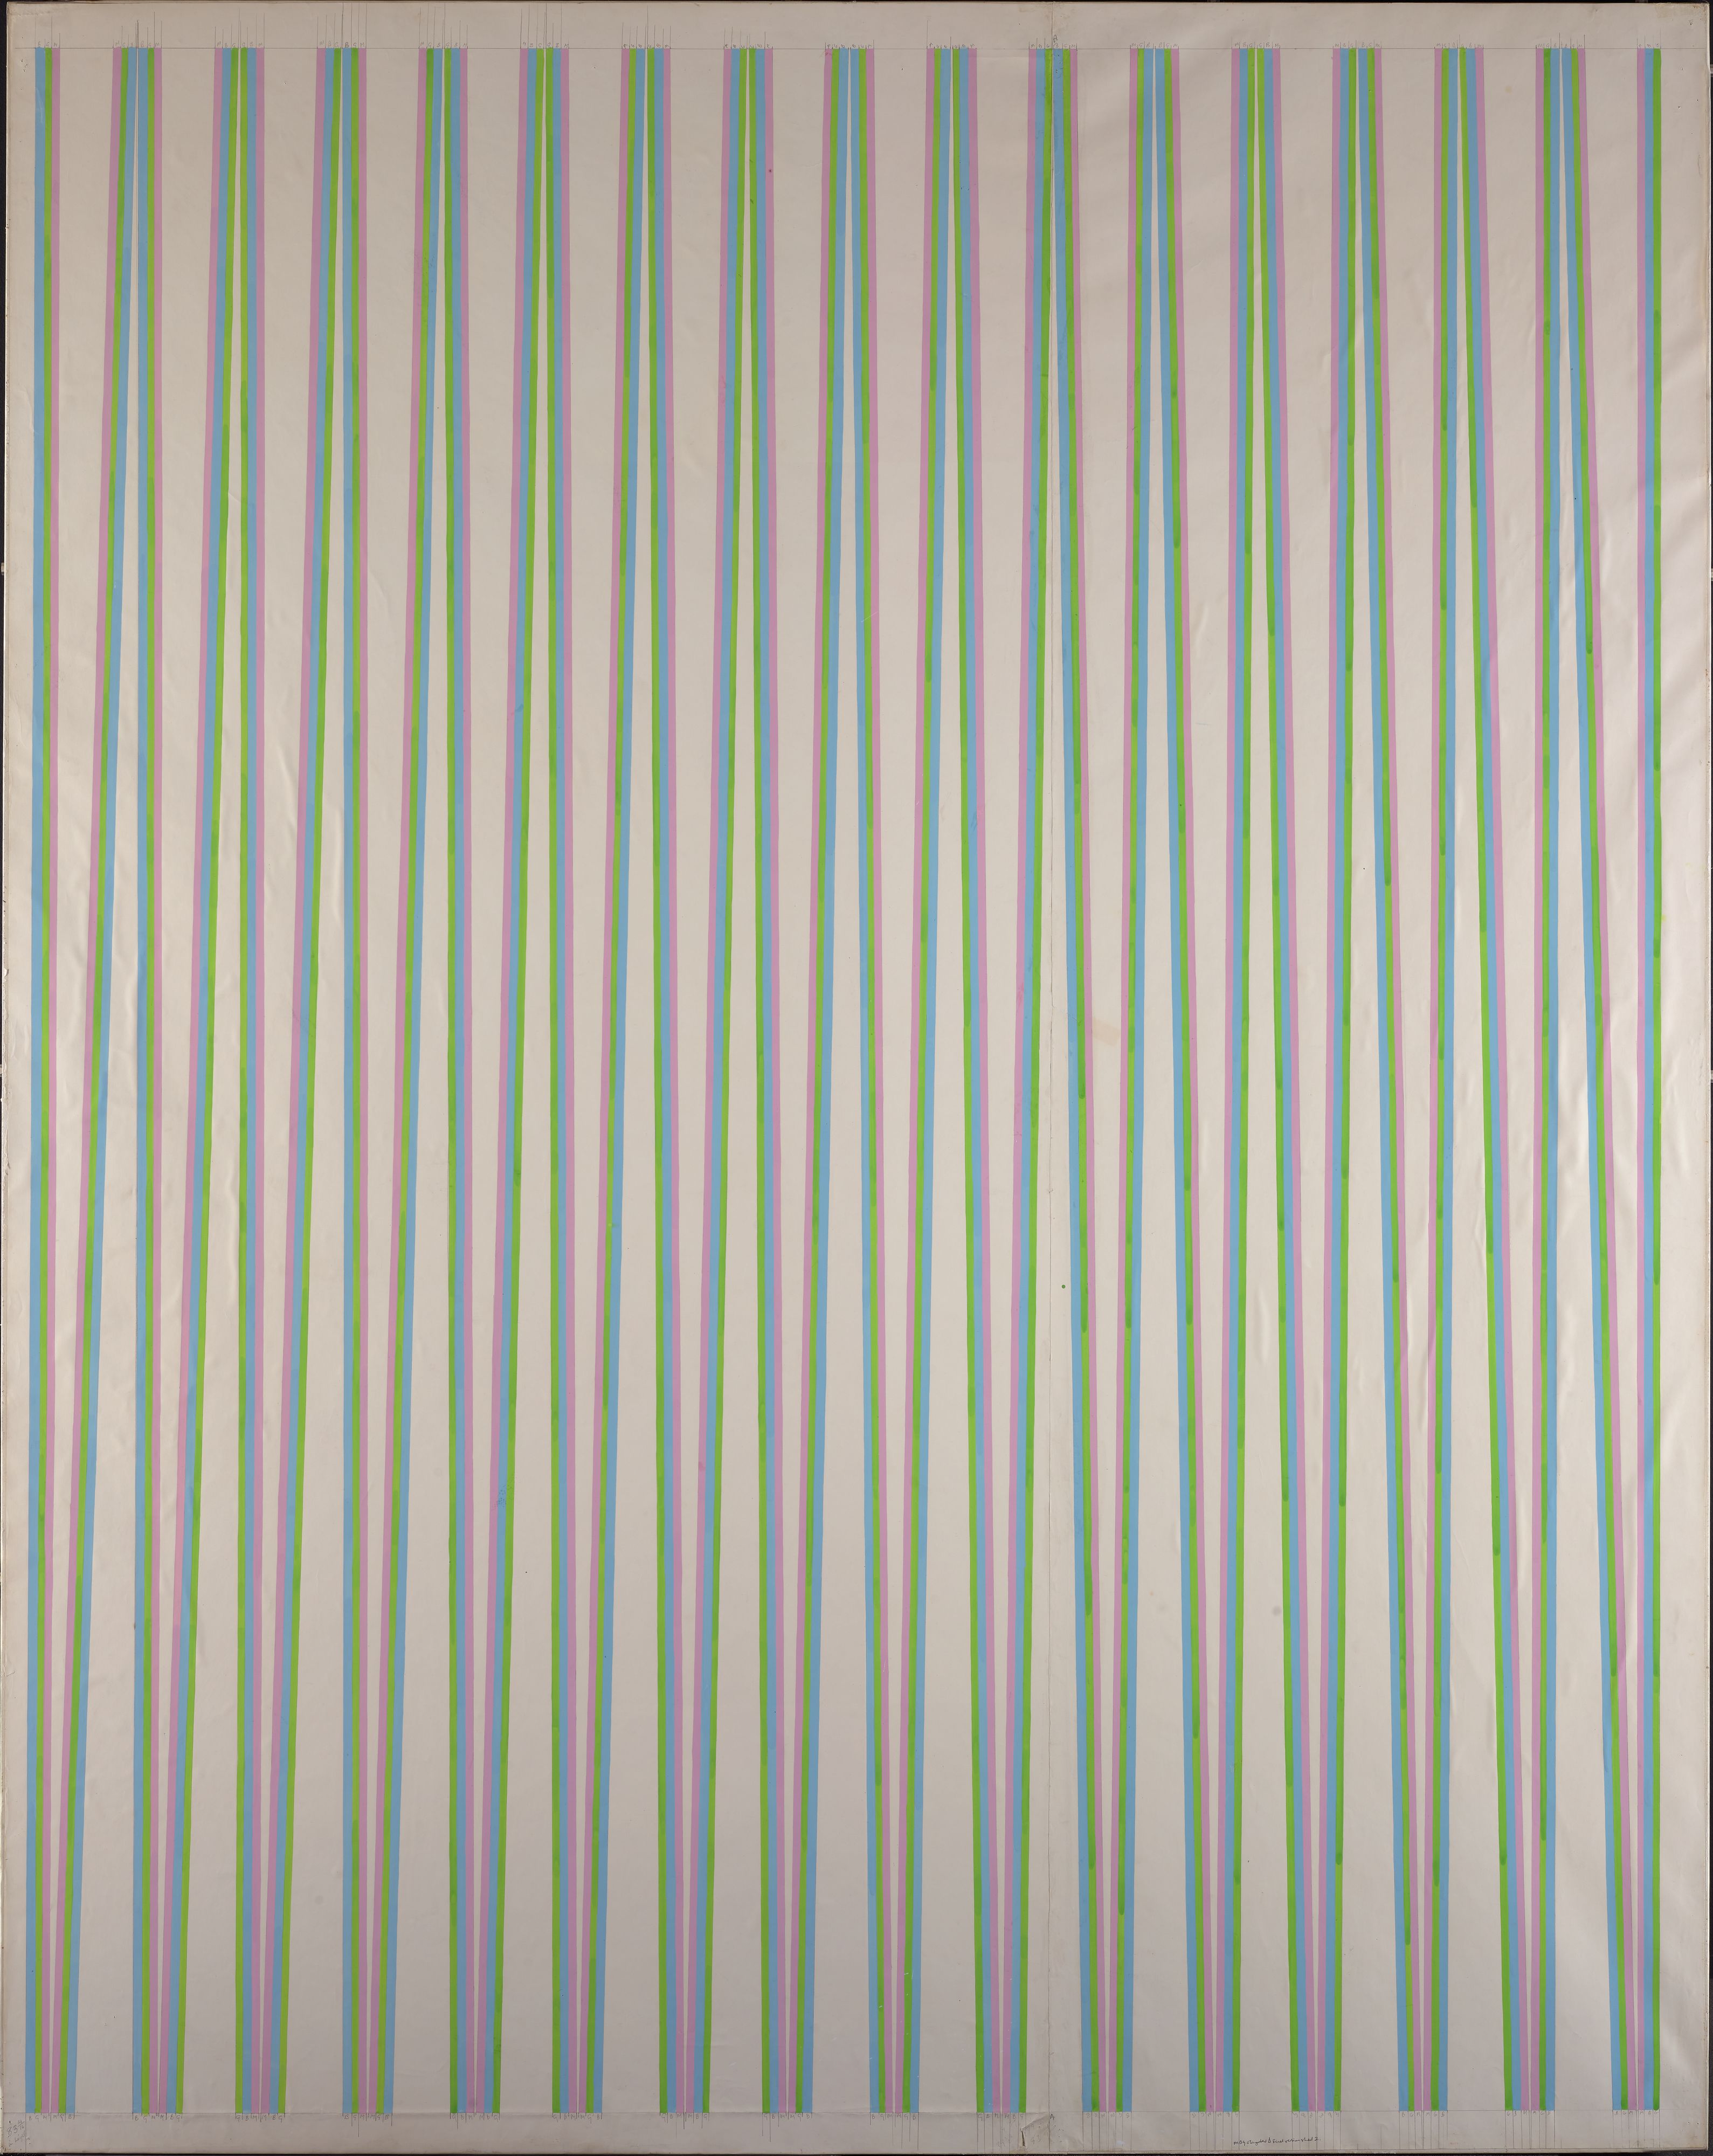 Final Cartoon for pale green/blue magenta elongated triangles (1969-70)